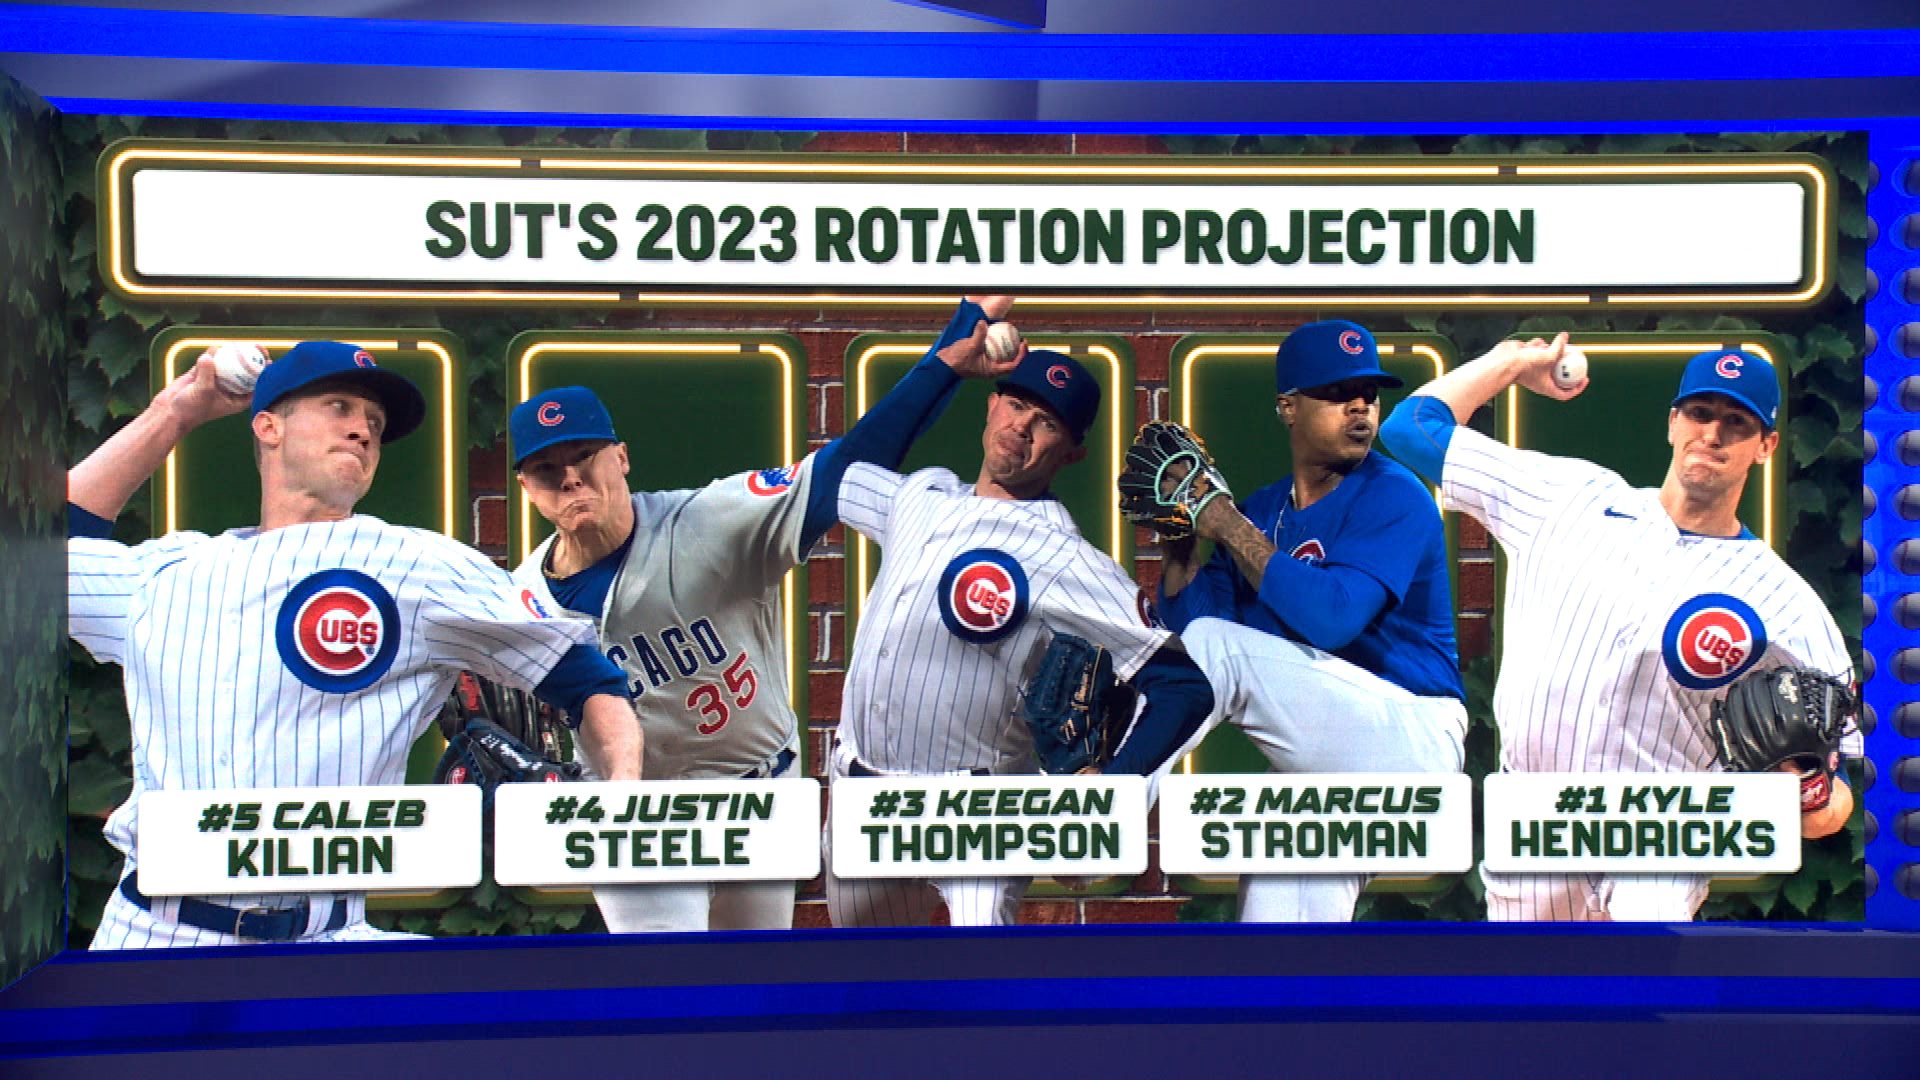 Projecting what the 2023 Cubs starting rotation looks like